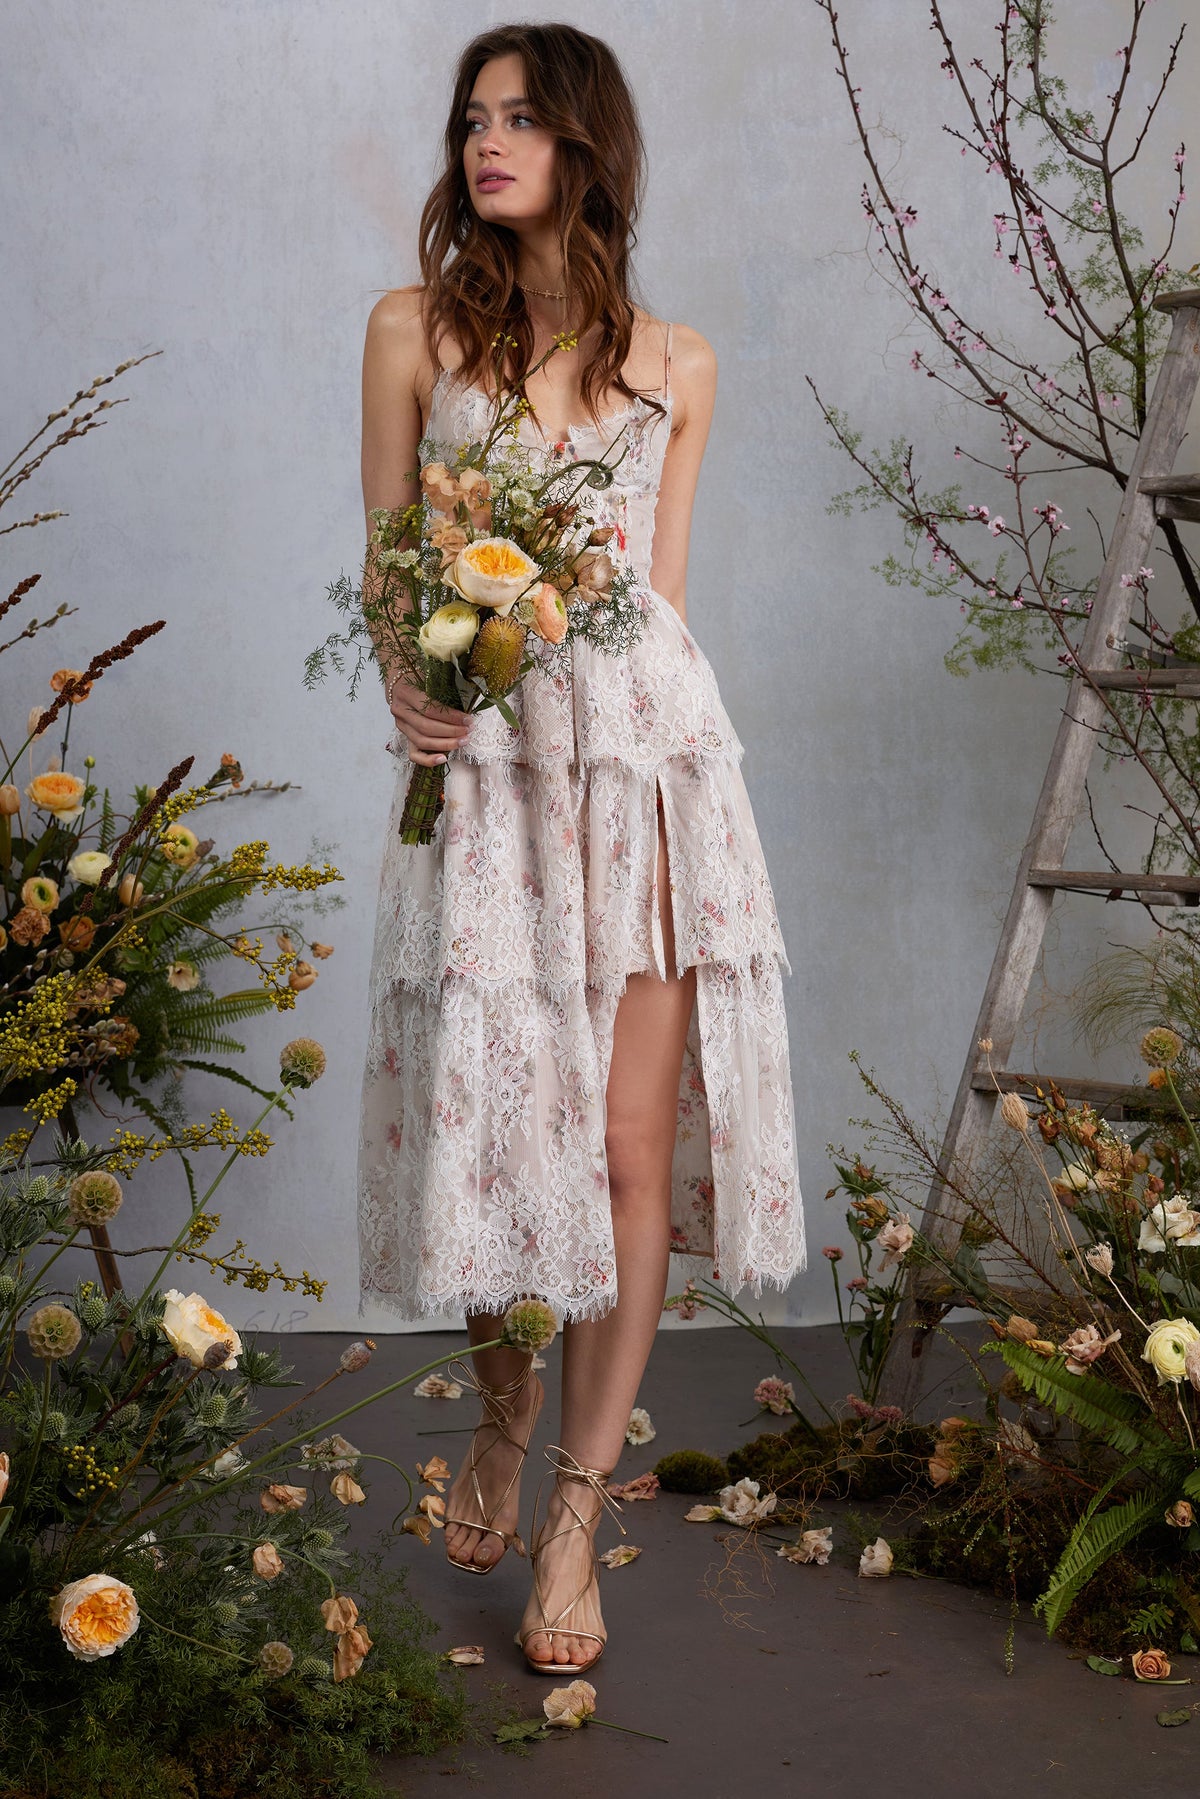 The Mia Dress in Natural Dainty Floral